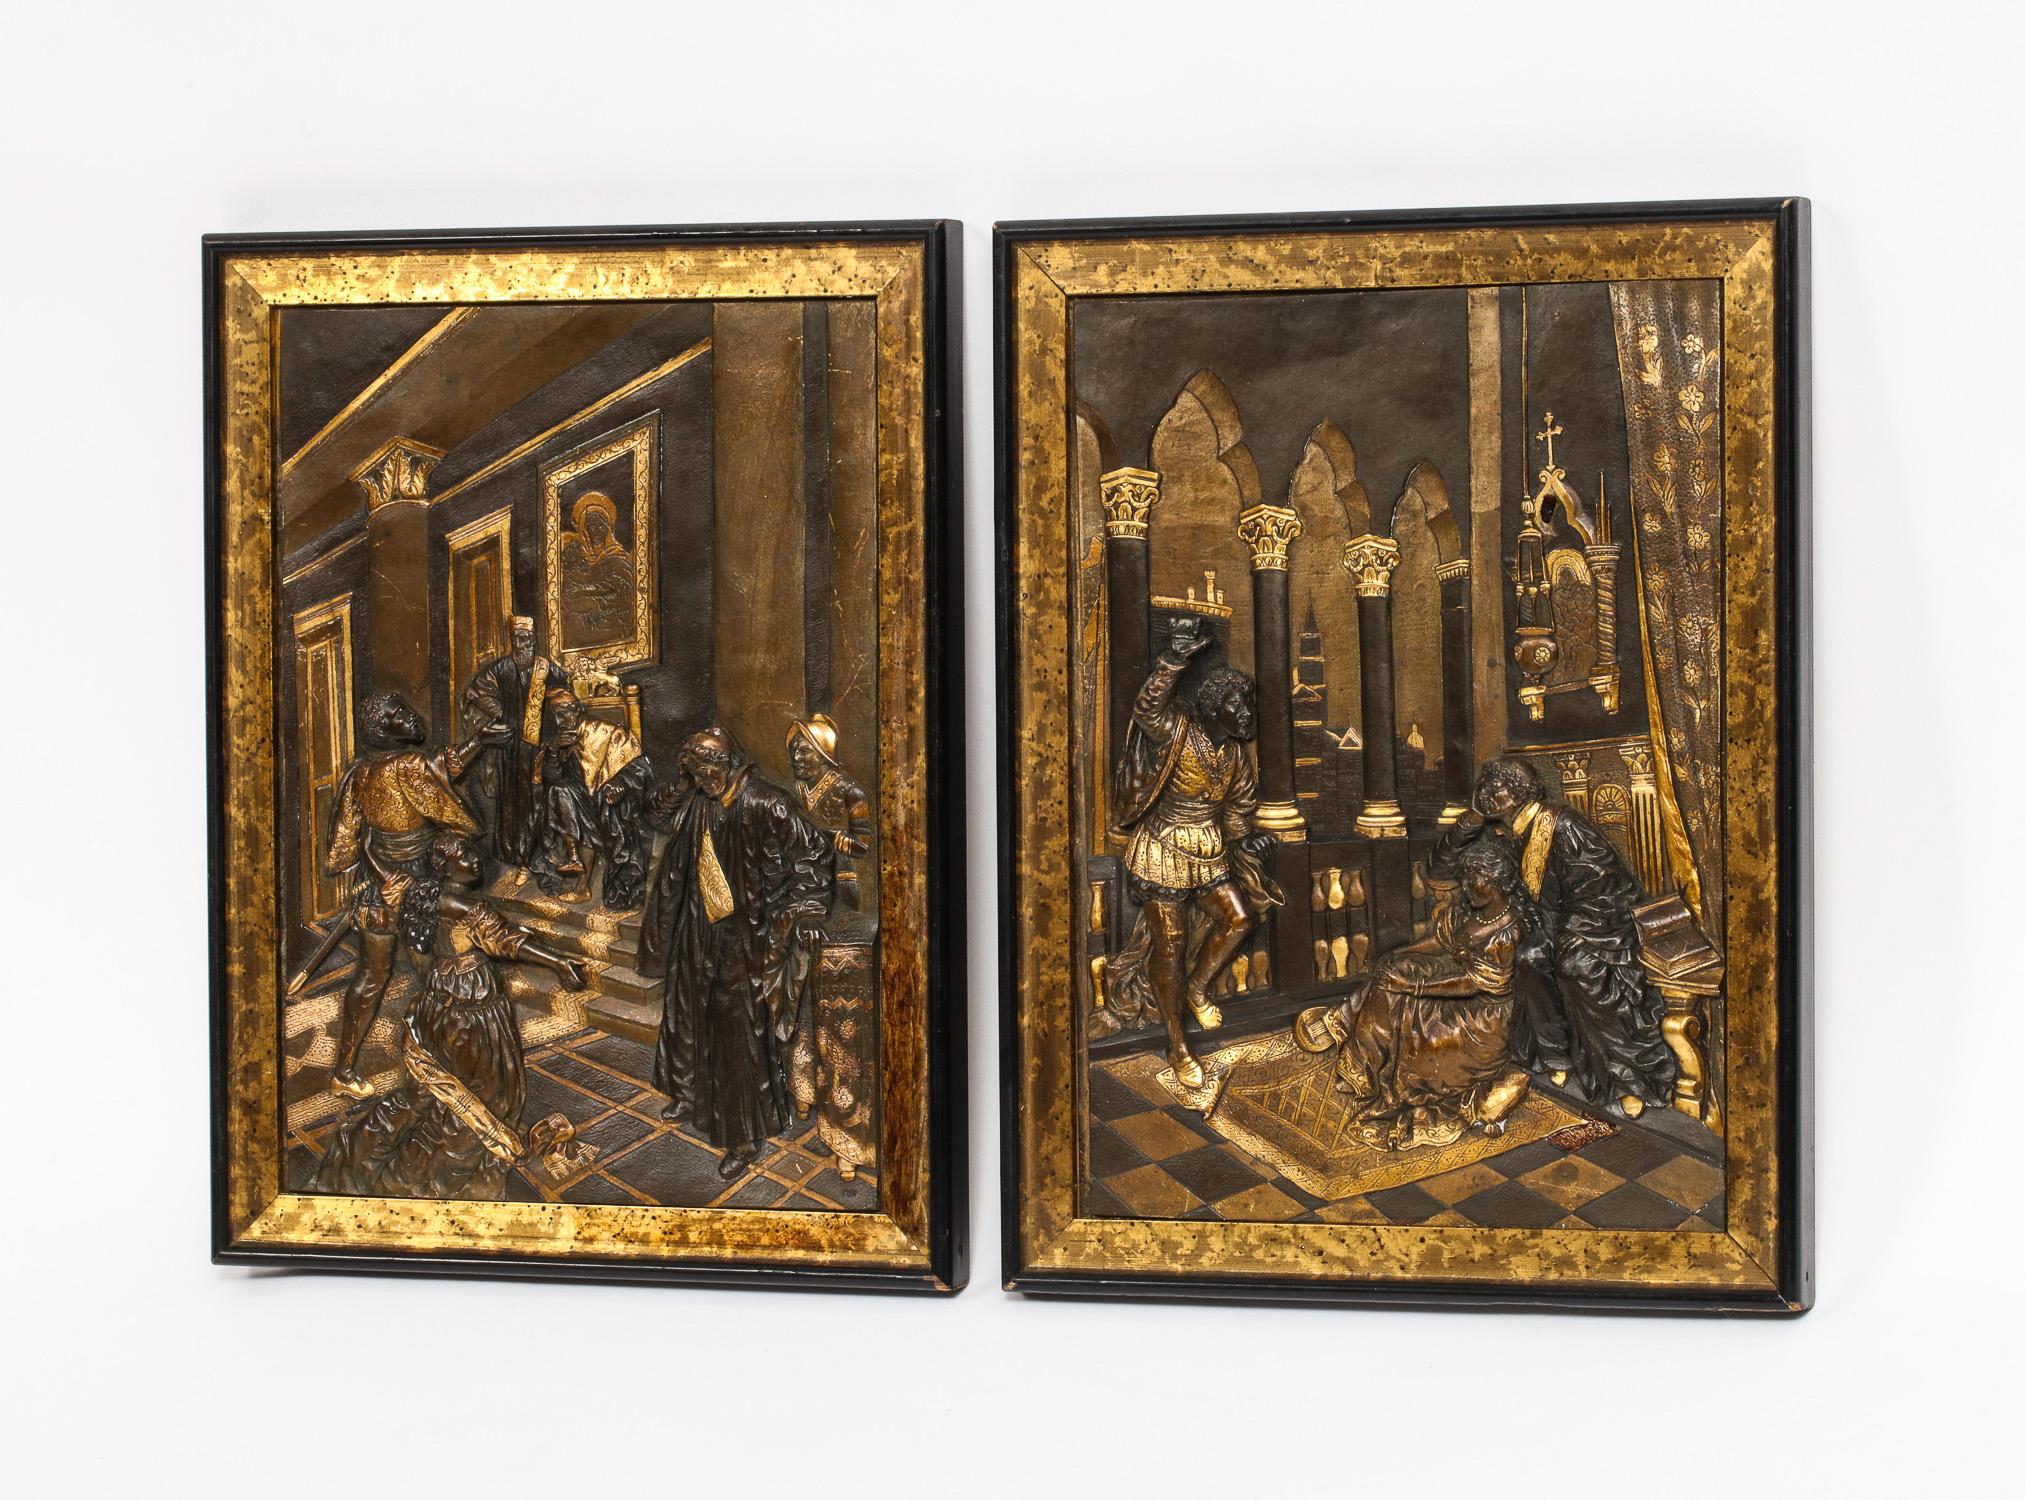 Pair of exquisite quality French gilt and patinated bronze relief plaques depicting Shakespeare's Othello, circa 1890.

After the Othello painting by Carl Ludwig Friedrich Becker (1820-1900).

In original frames. 

Beautifully detailed with